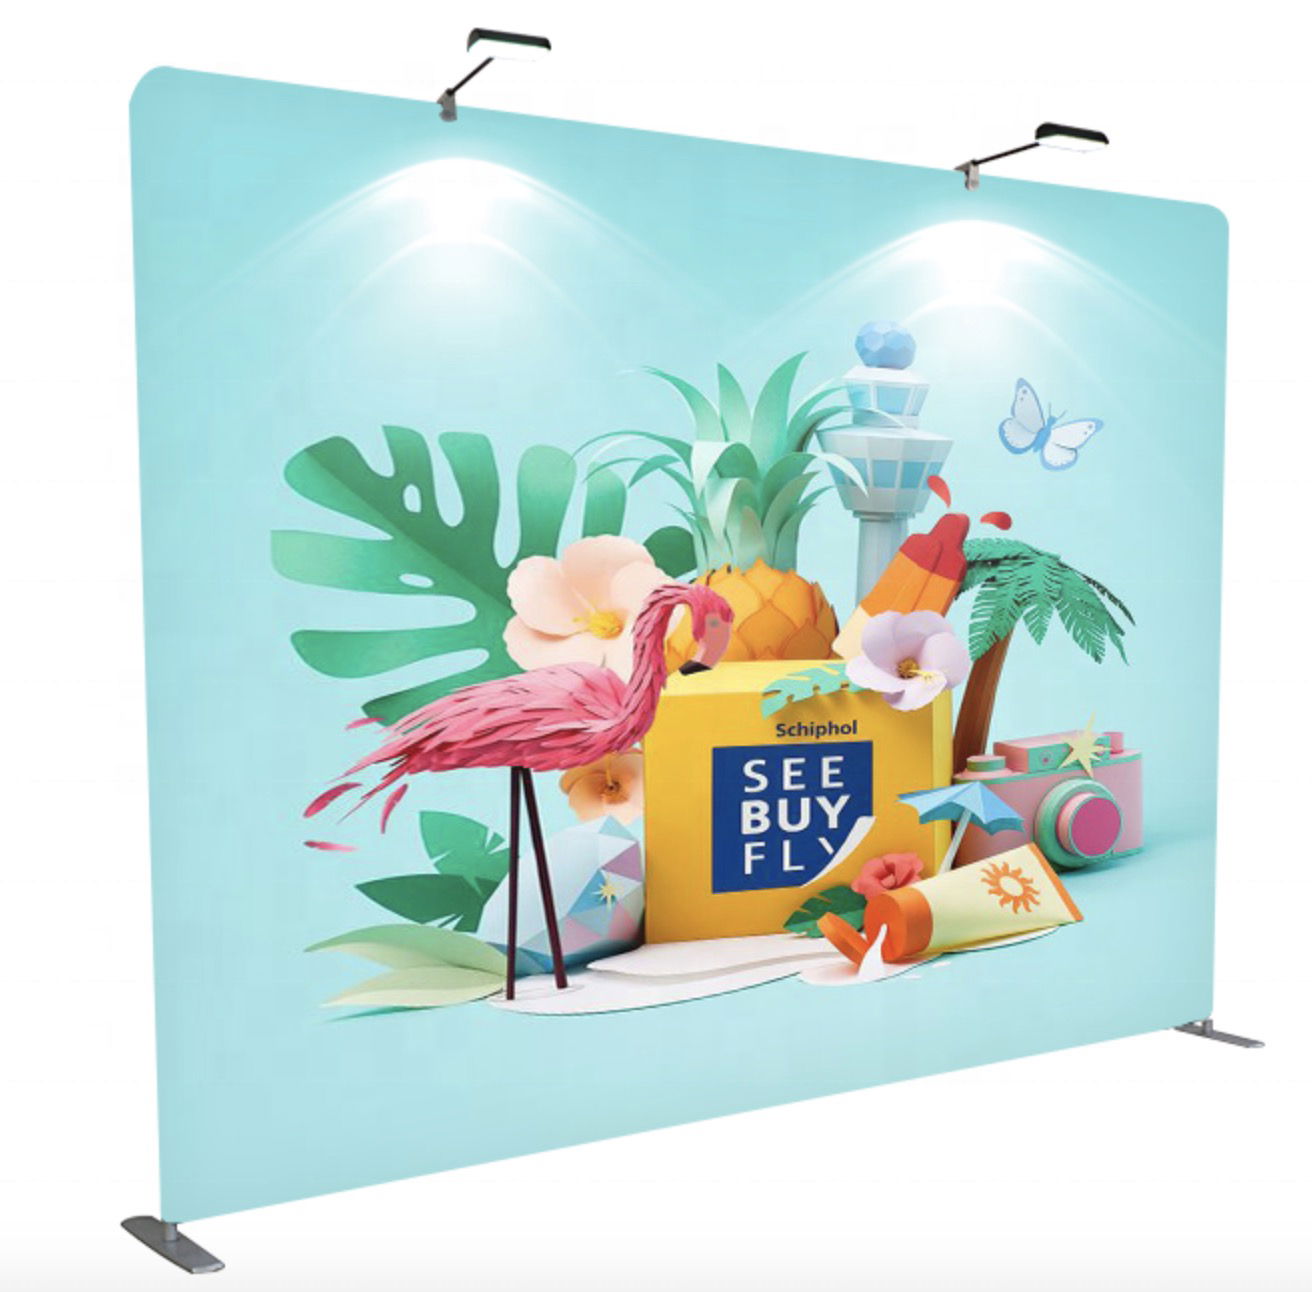 Umbrellas Roll Up Banners Beach Flags Booth Display Banners